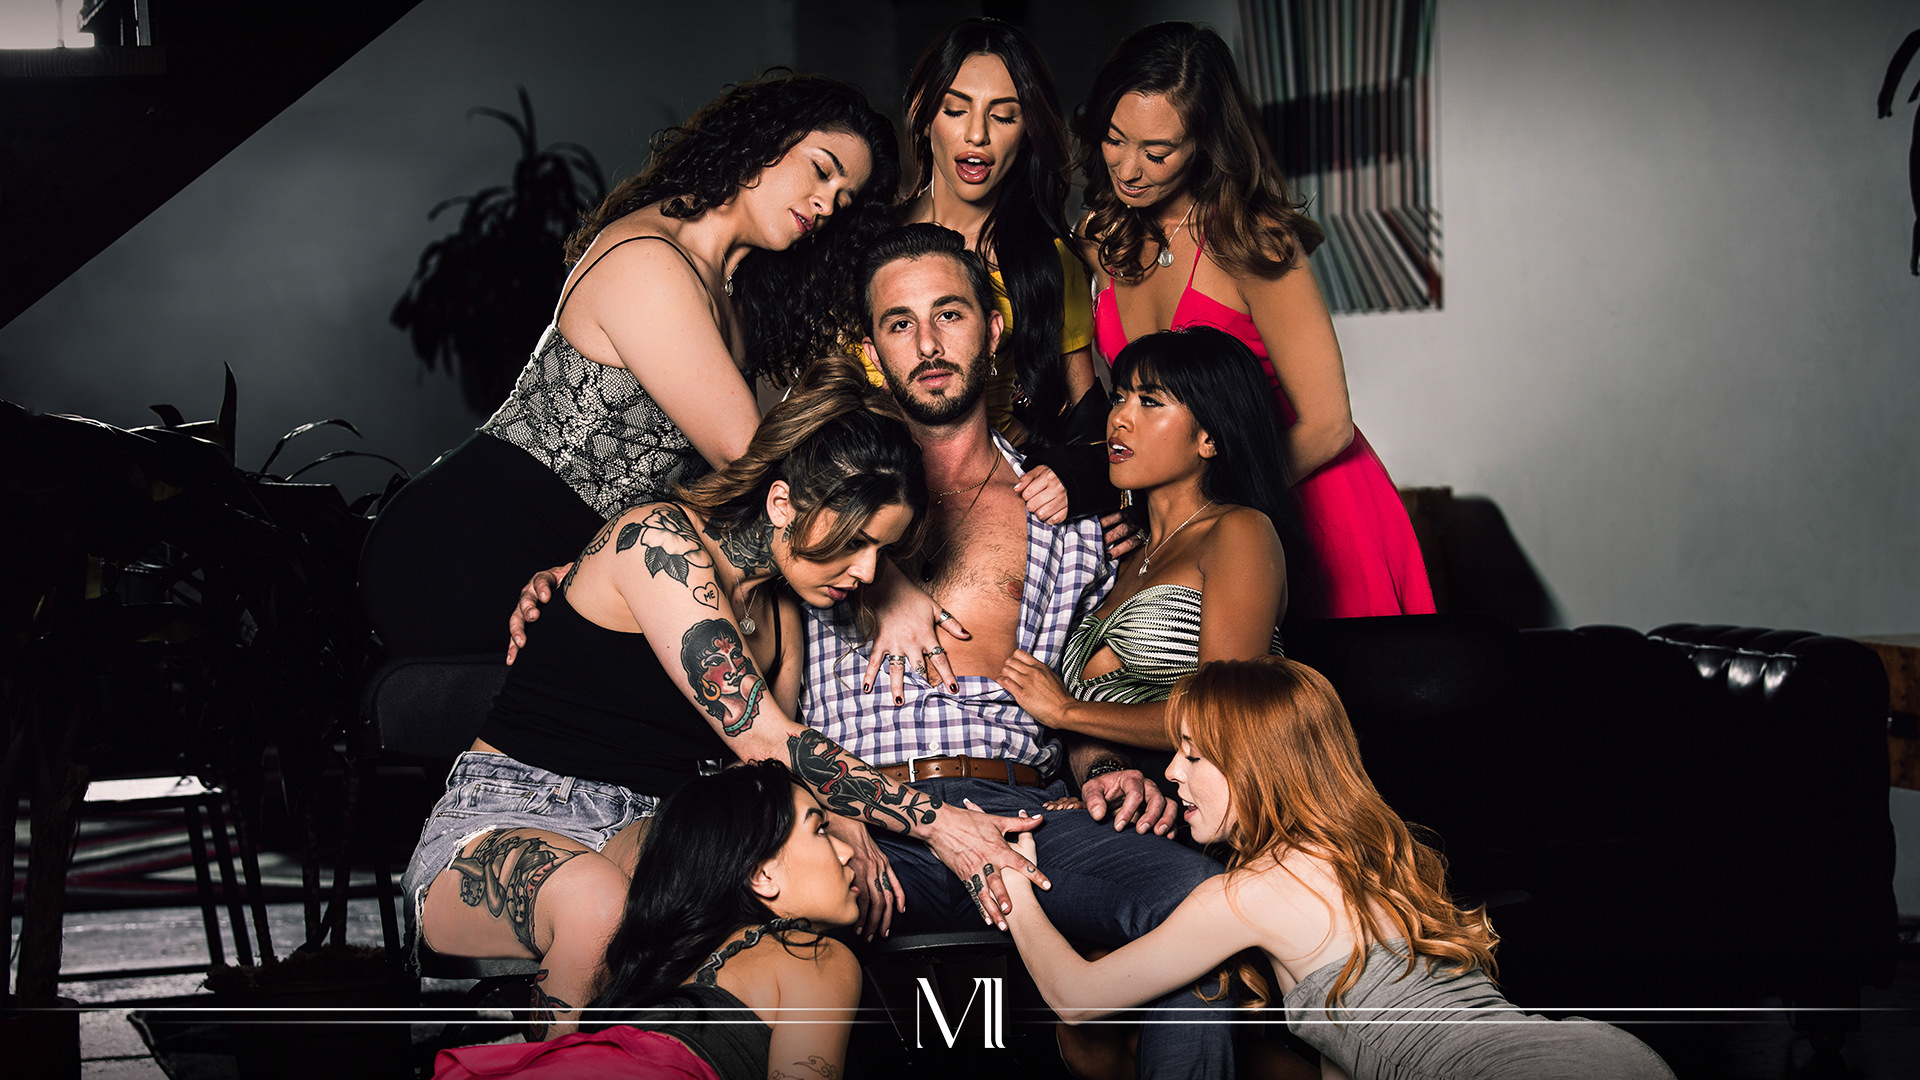 Christy Love, Victoria Voxxx, Lucas Frost, Hime Marie, Ember Snow, Madi Collins, Kimmy Kimm, Vanessa Vega Sinners Anonymous ModernDaySins